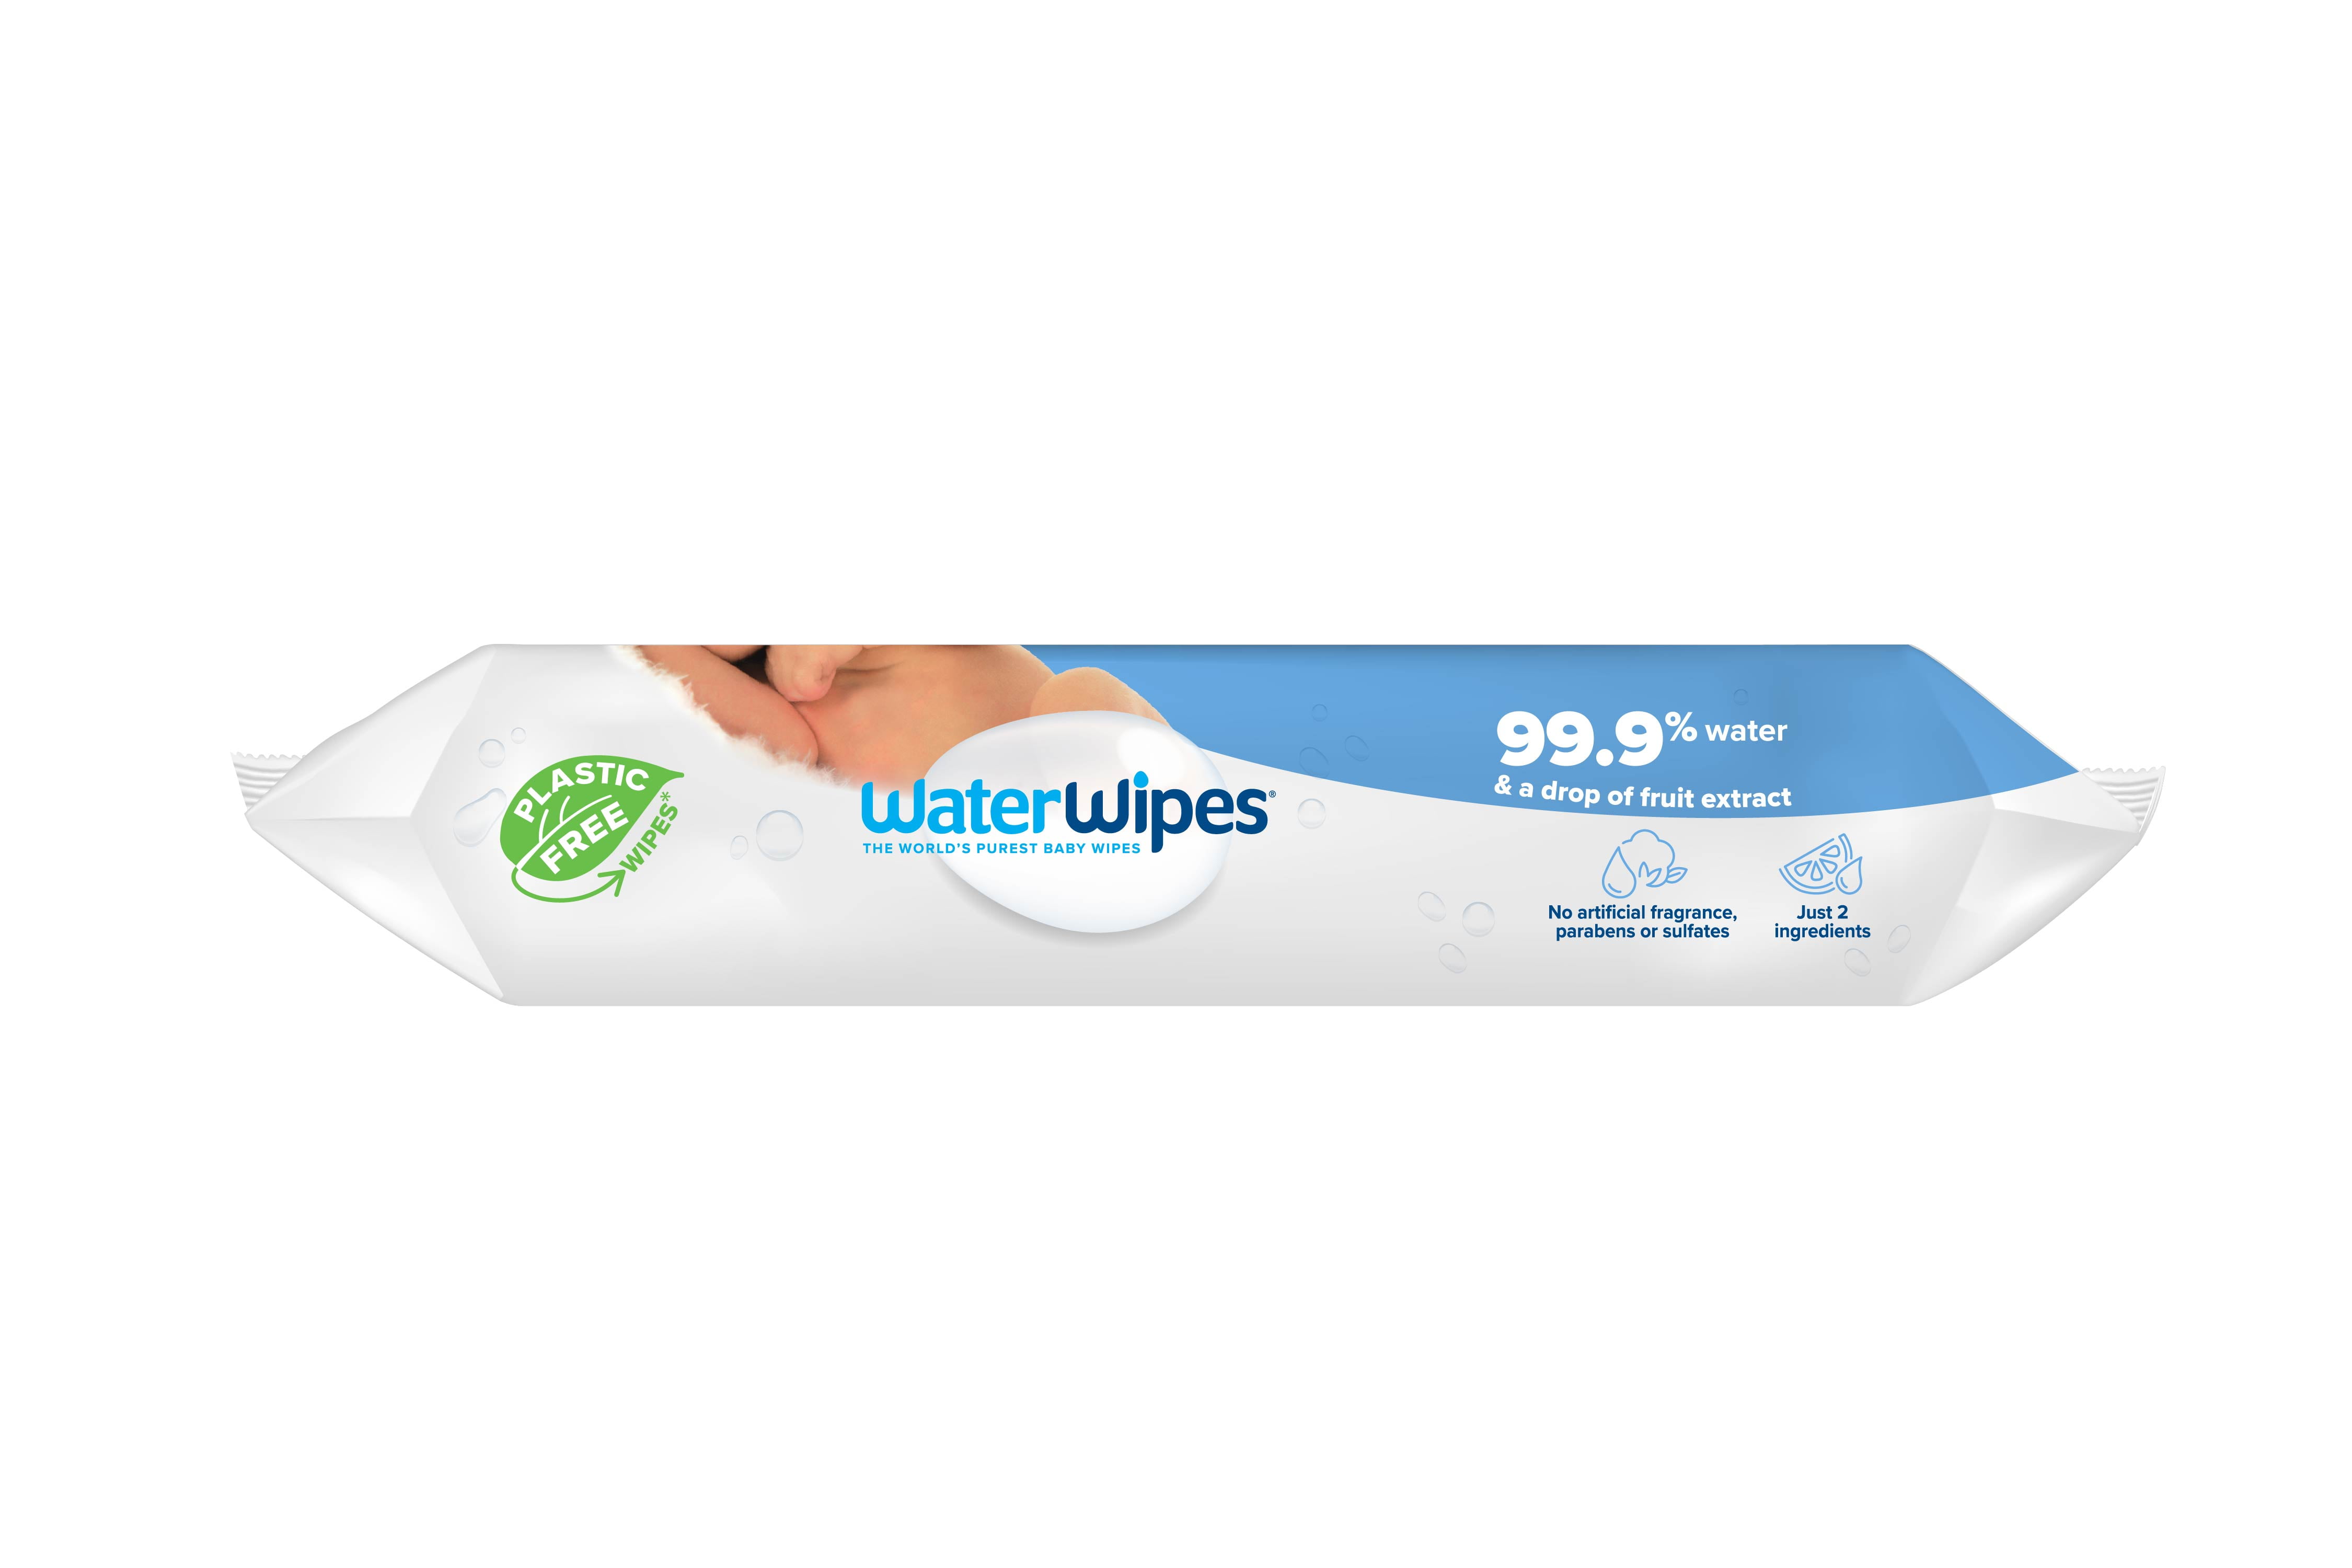 I found water wipes for my baby who has sensitive skin. : r/Vine